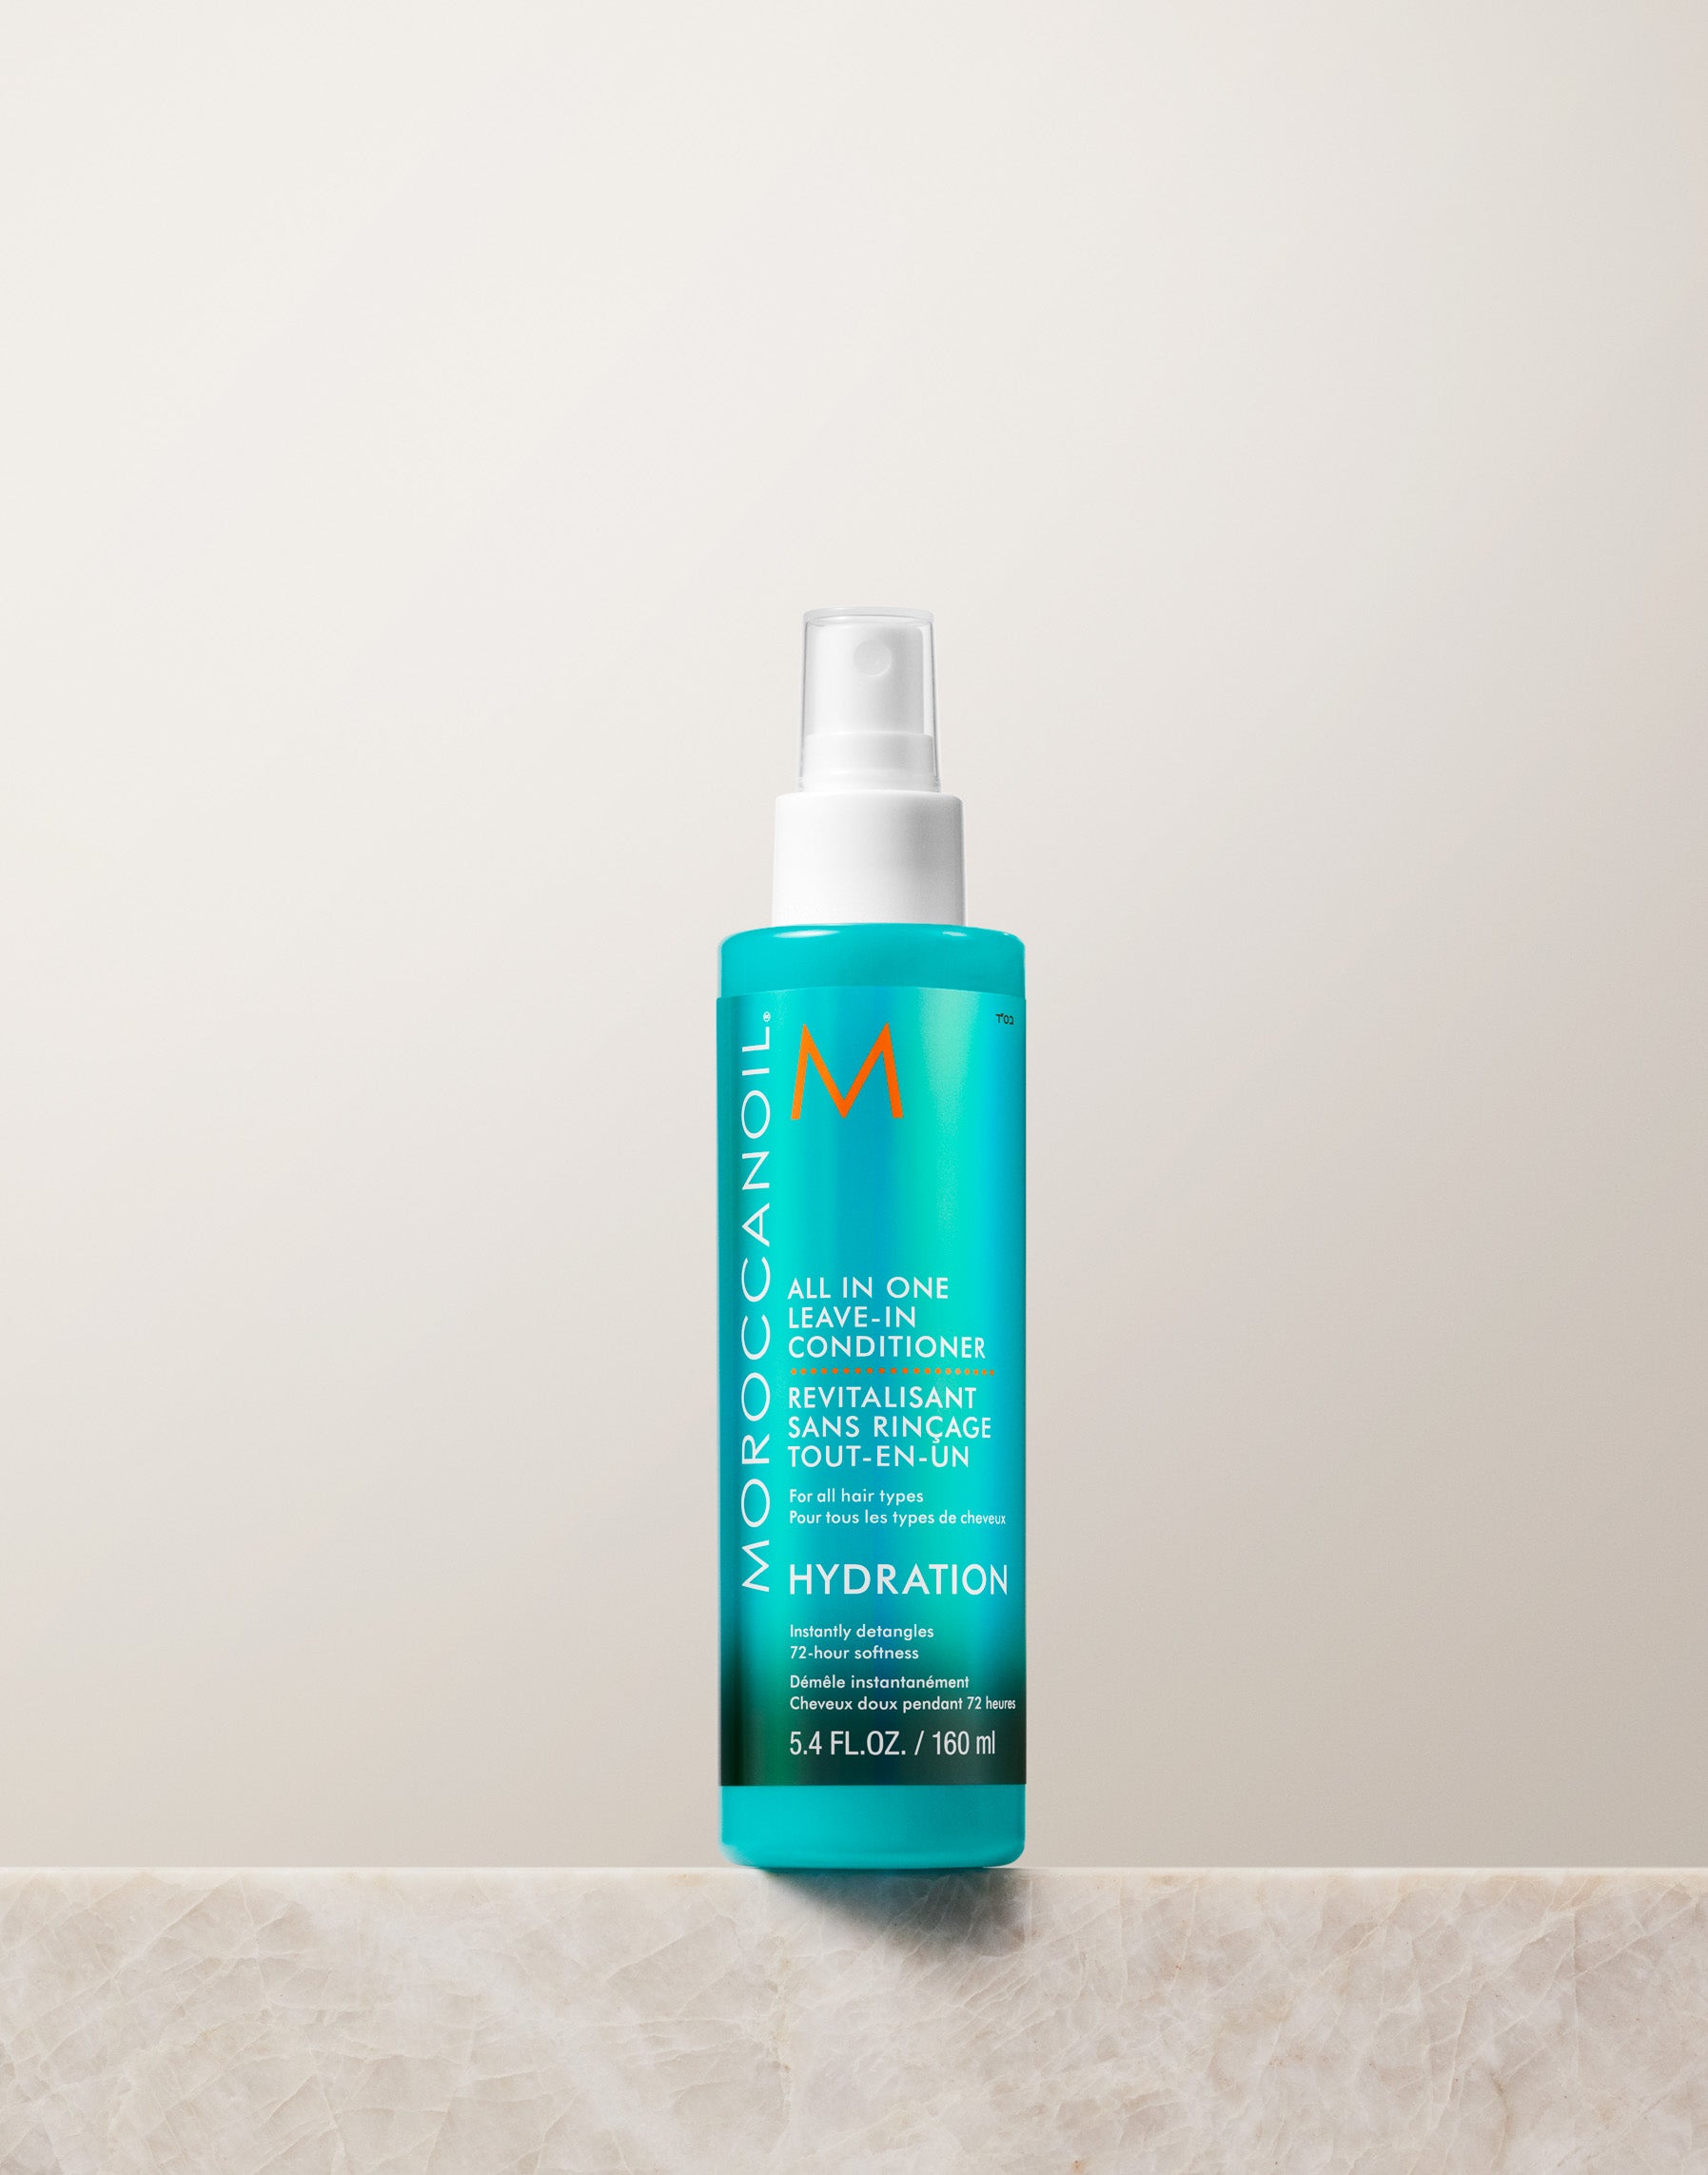 Moroccanoil Color Complete Color Continue Shampoo 8.5 Oz & Conditioner 8.5  Oz & Protect And Prevent Spray 5.4 Oz Combo Pack : Target